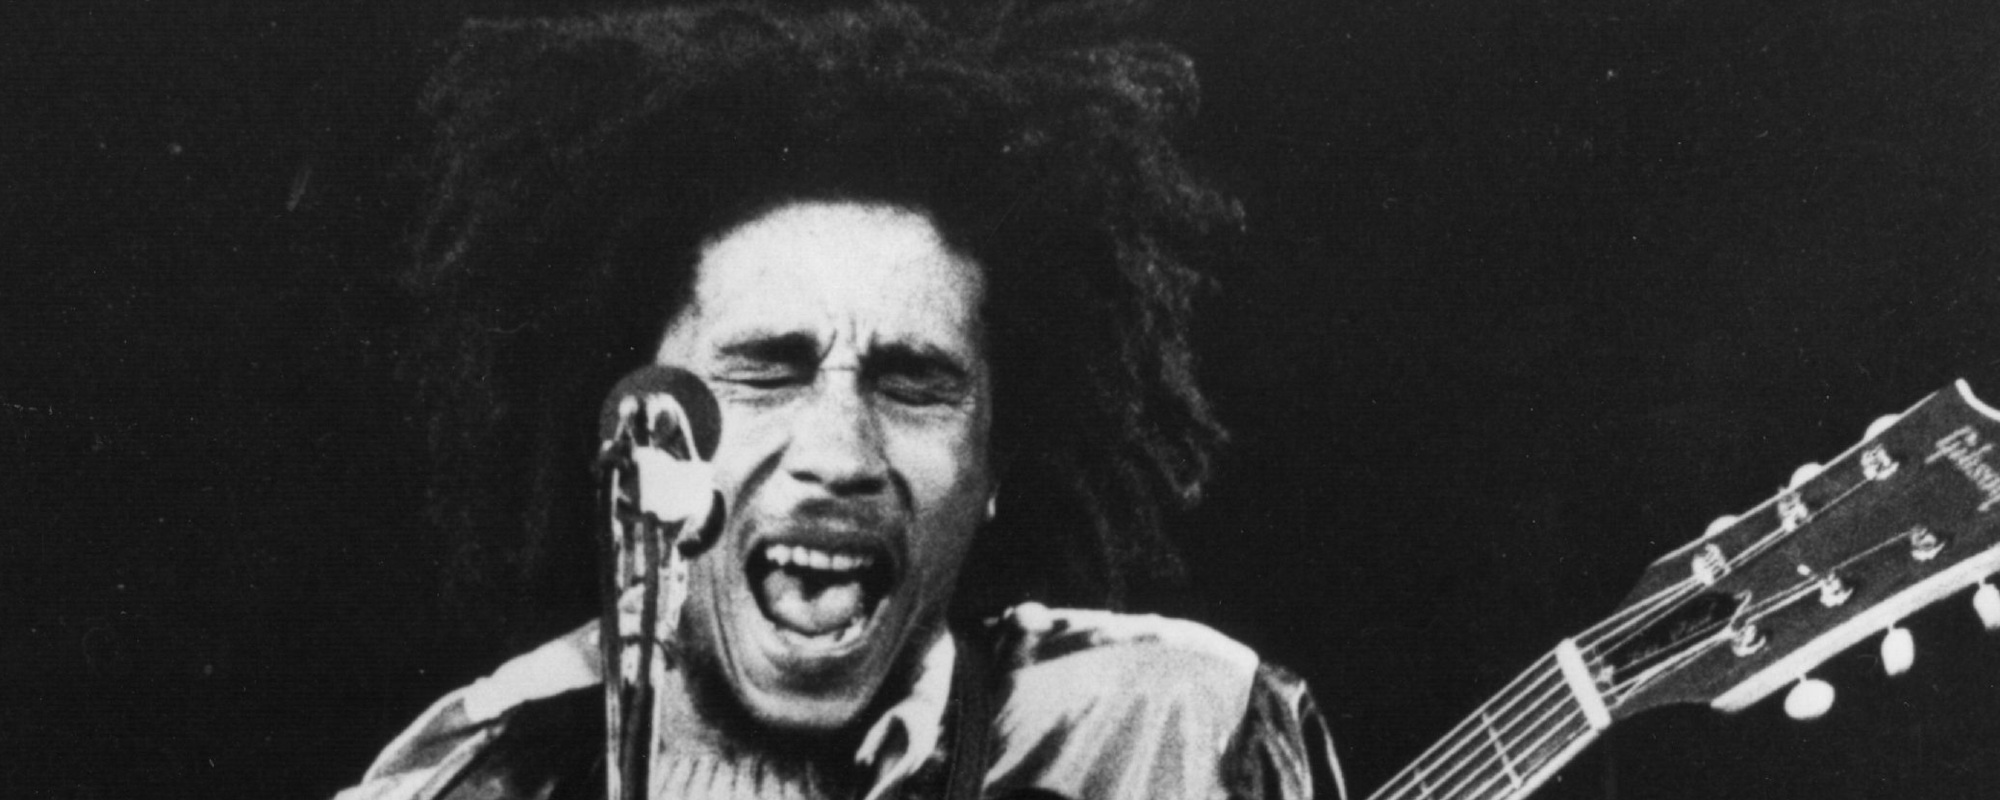 Bob Marley and the Wailers’ Landmark Album ‘Catch a Fire’ Gets 50th Anniversary Deluxe Edition